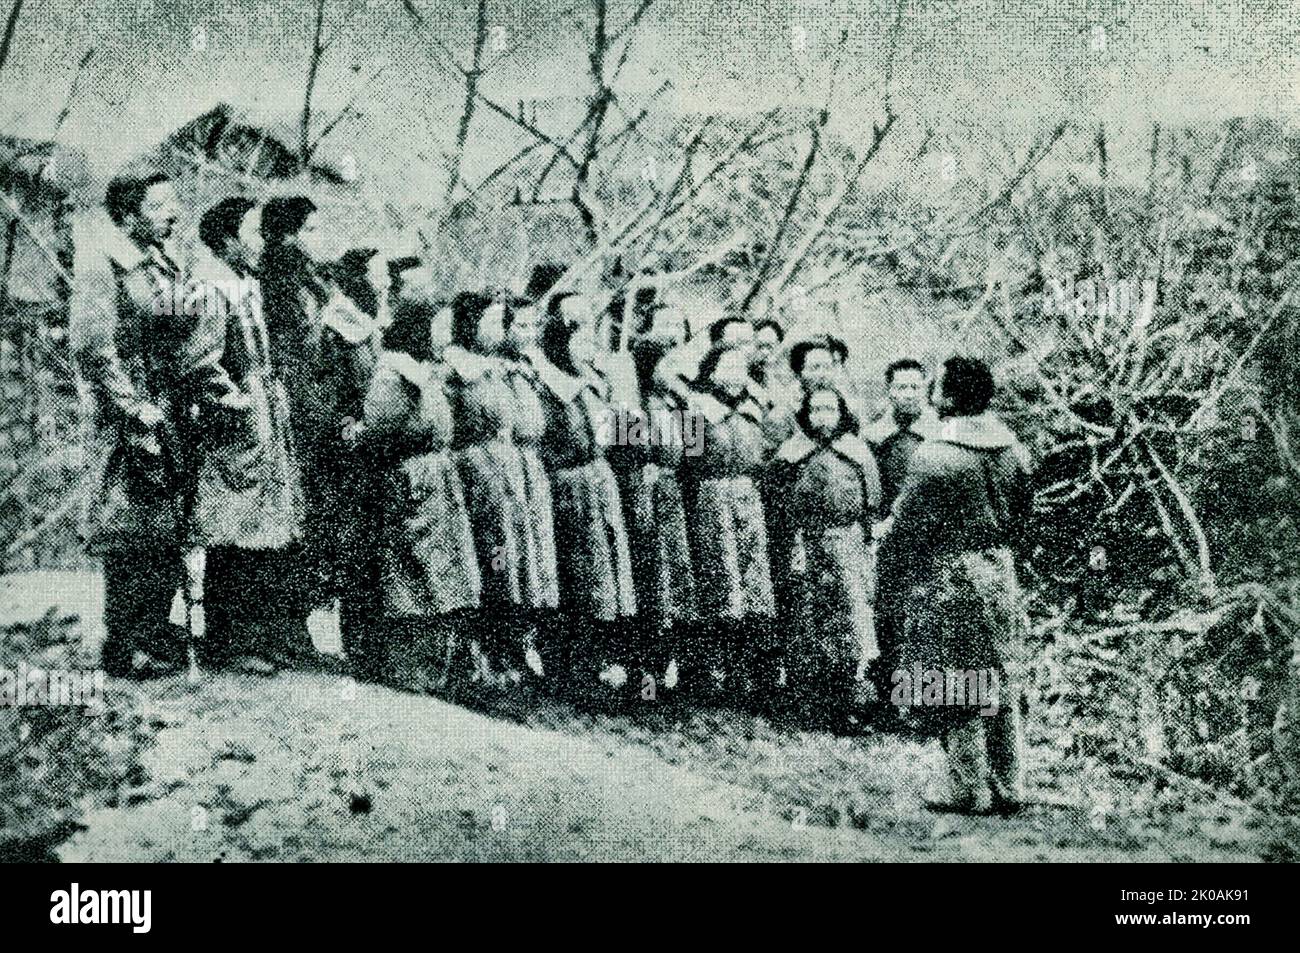 Girl scout Yang Huimin contributes the national flag, encouraging sentiments against Japan's invasion. This was during the Japanese invasion of China. Stock Photo